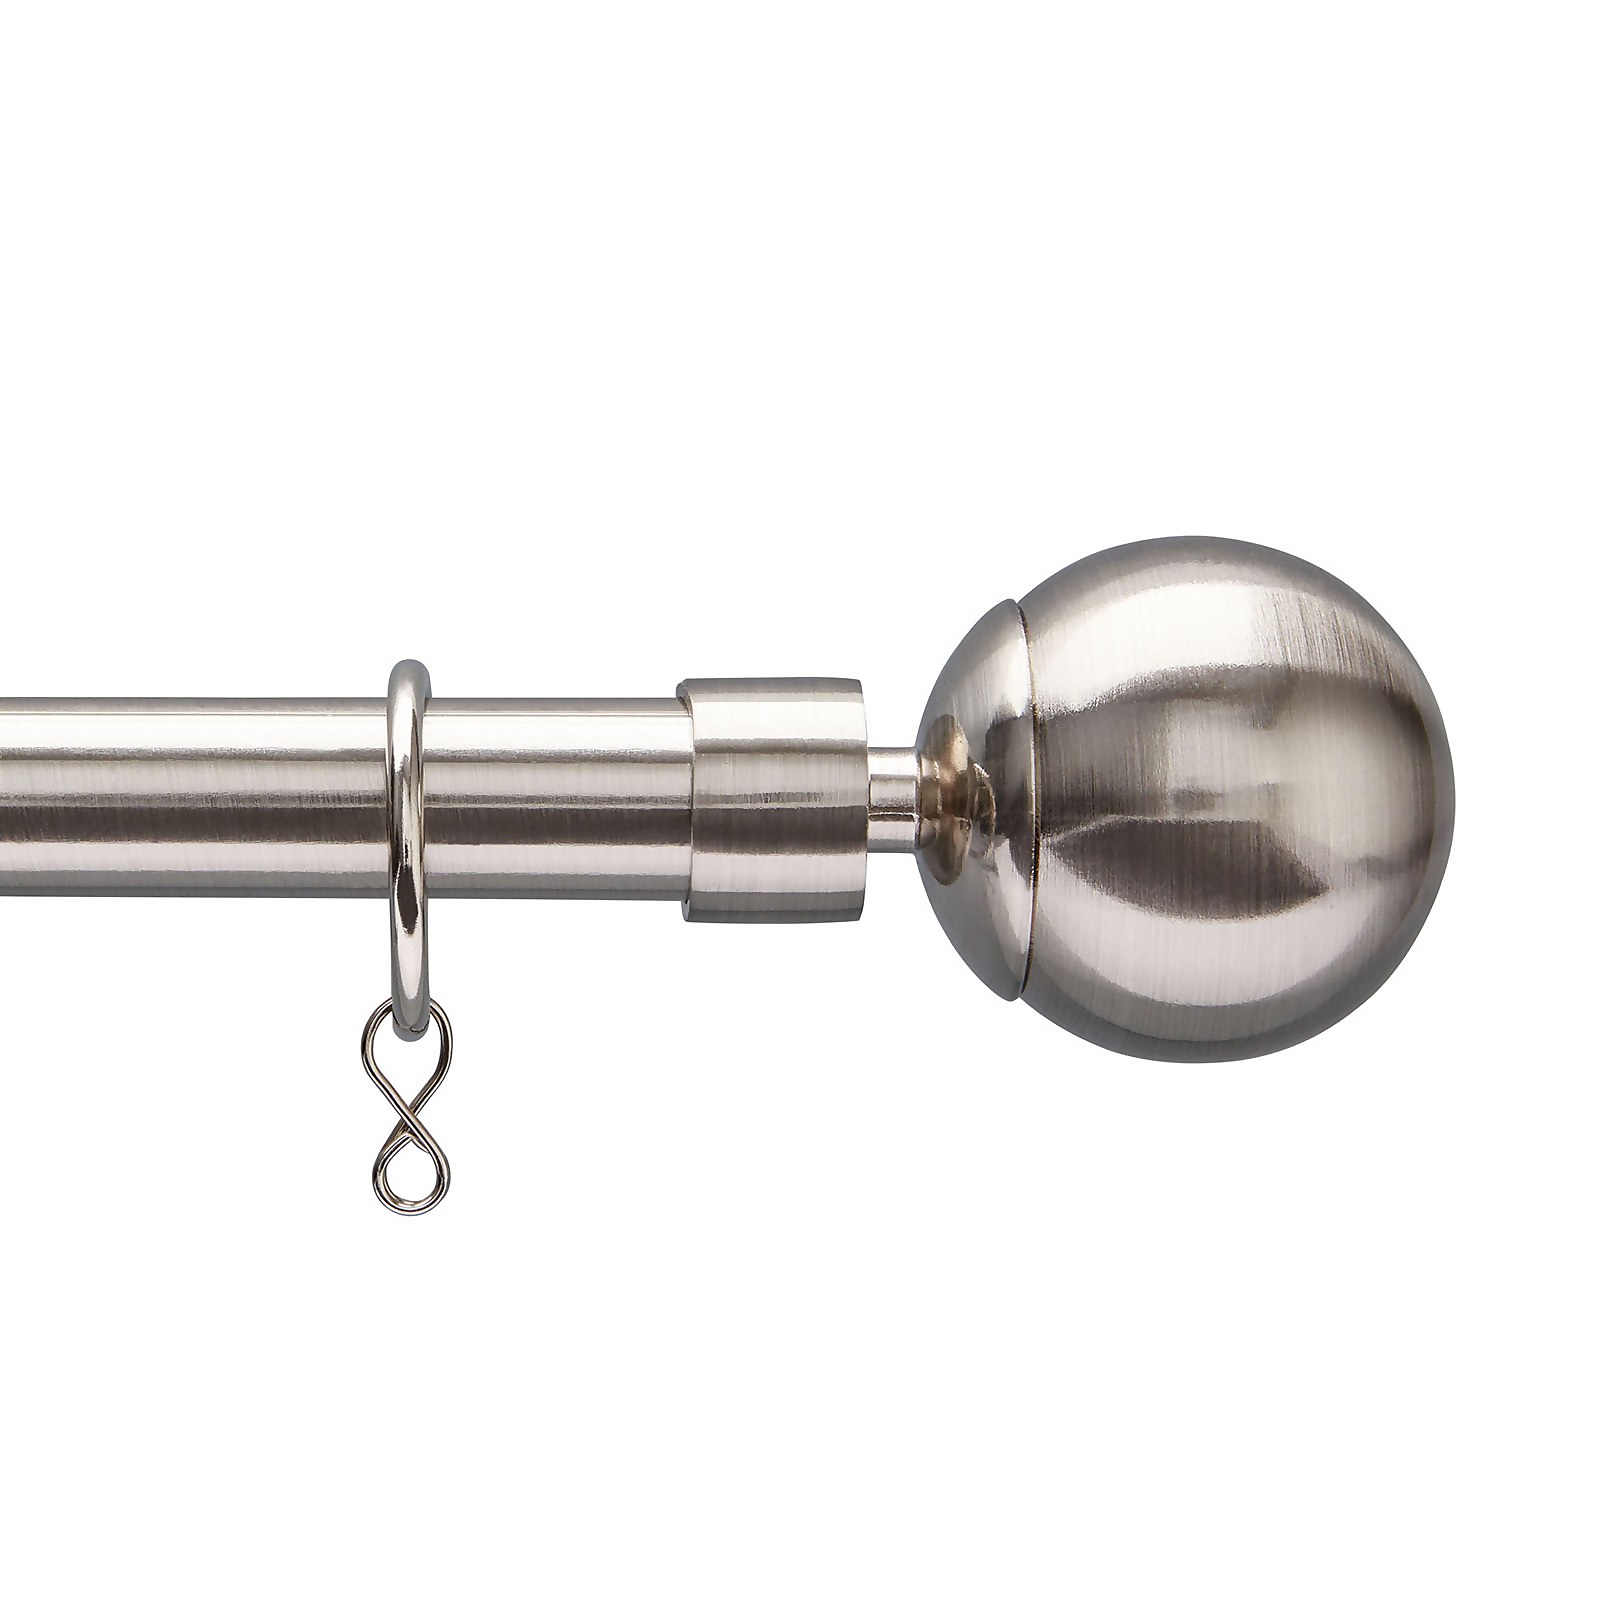 Photo of Extendable Ball Finial Curtain Pole - Satin Steel - 1.2-2.1m -16/19mm-